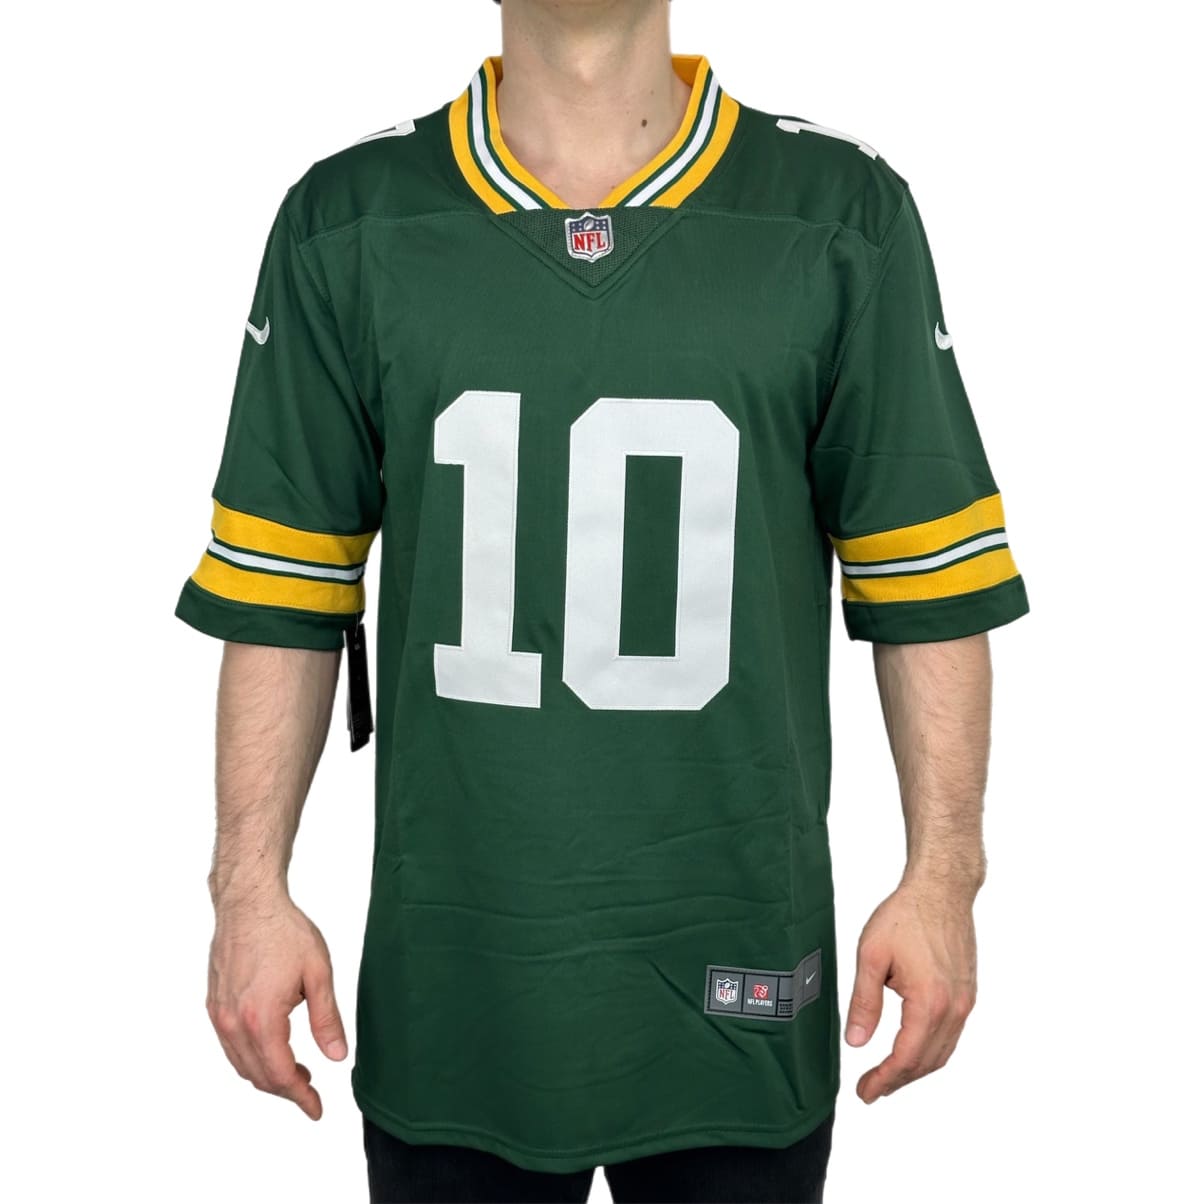 JERSEY PACKERS LOVE